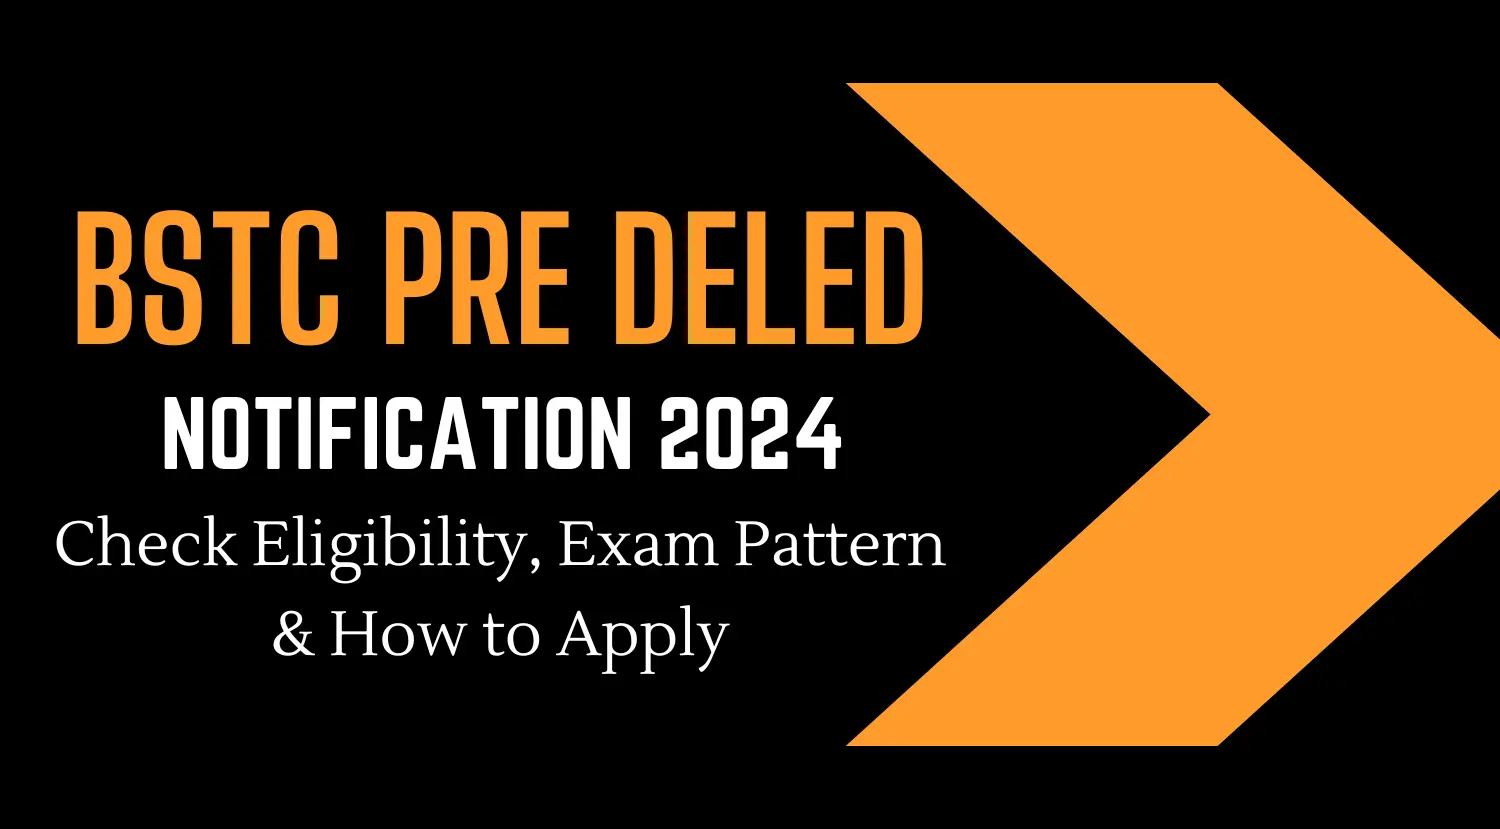 BSTC Pre DELED Notification 2024 Check Eligibility Exam Pattern How to Apply